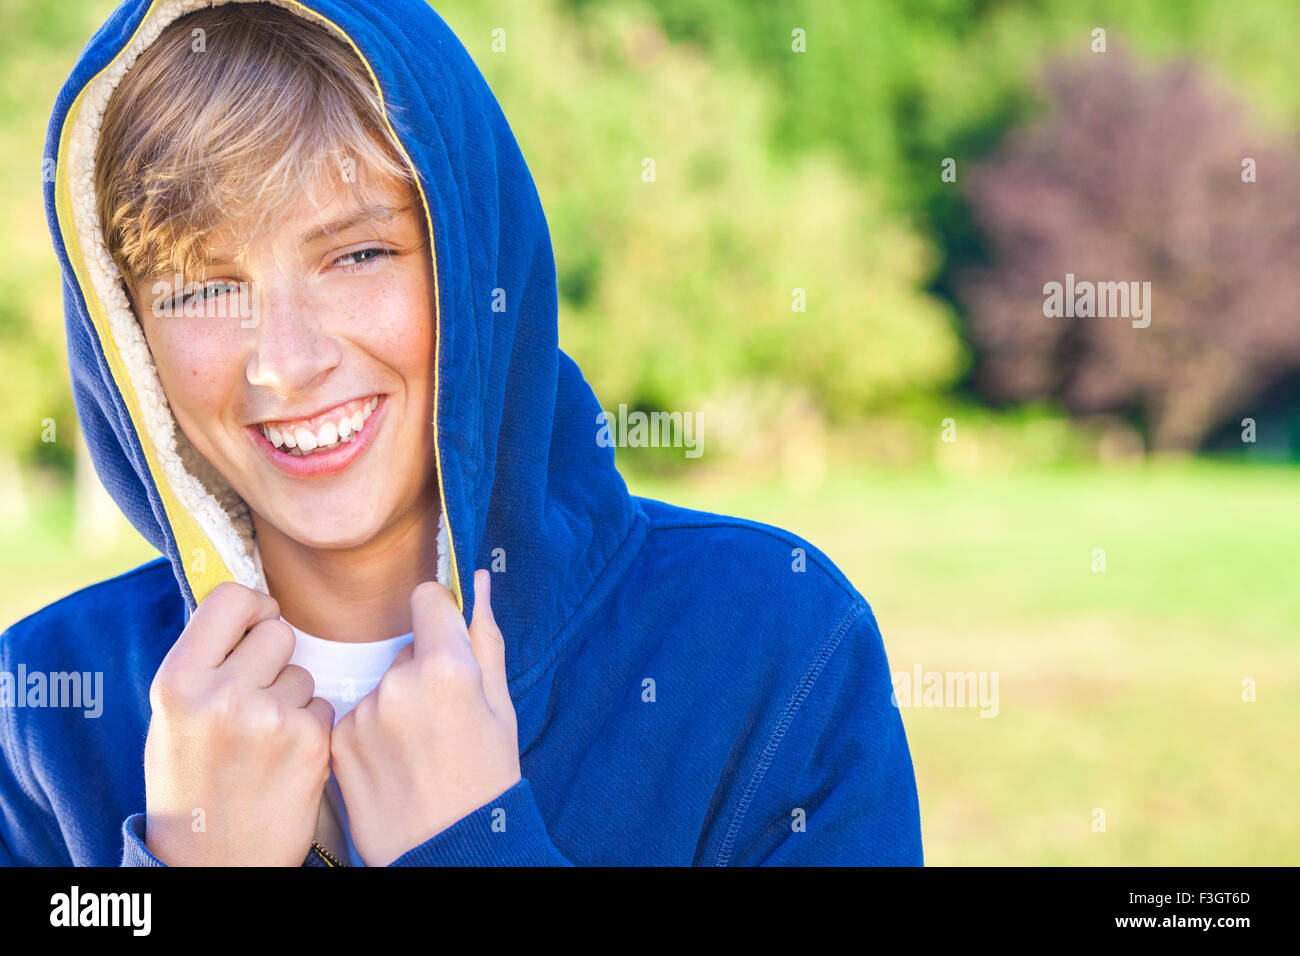 Young happy laughing male boy teenager blond child outside in summer sunshine wearing a blue hoody Stock Photo